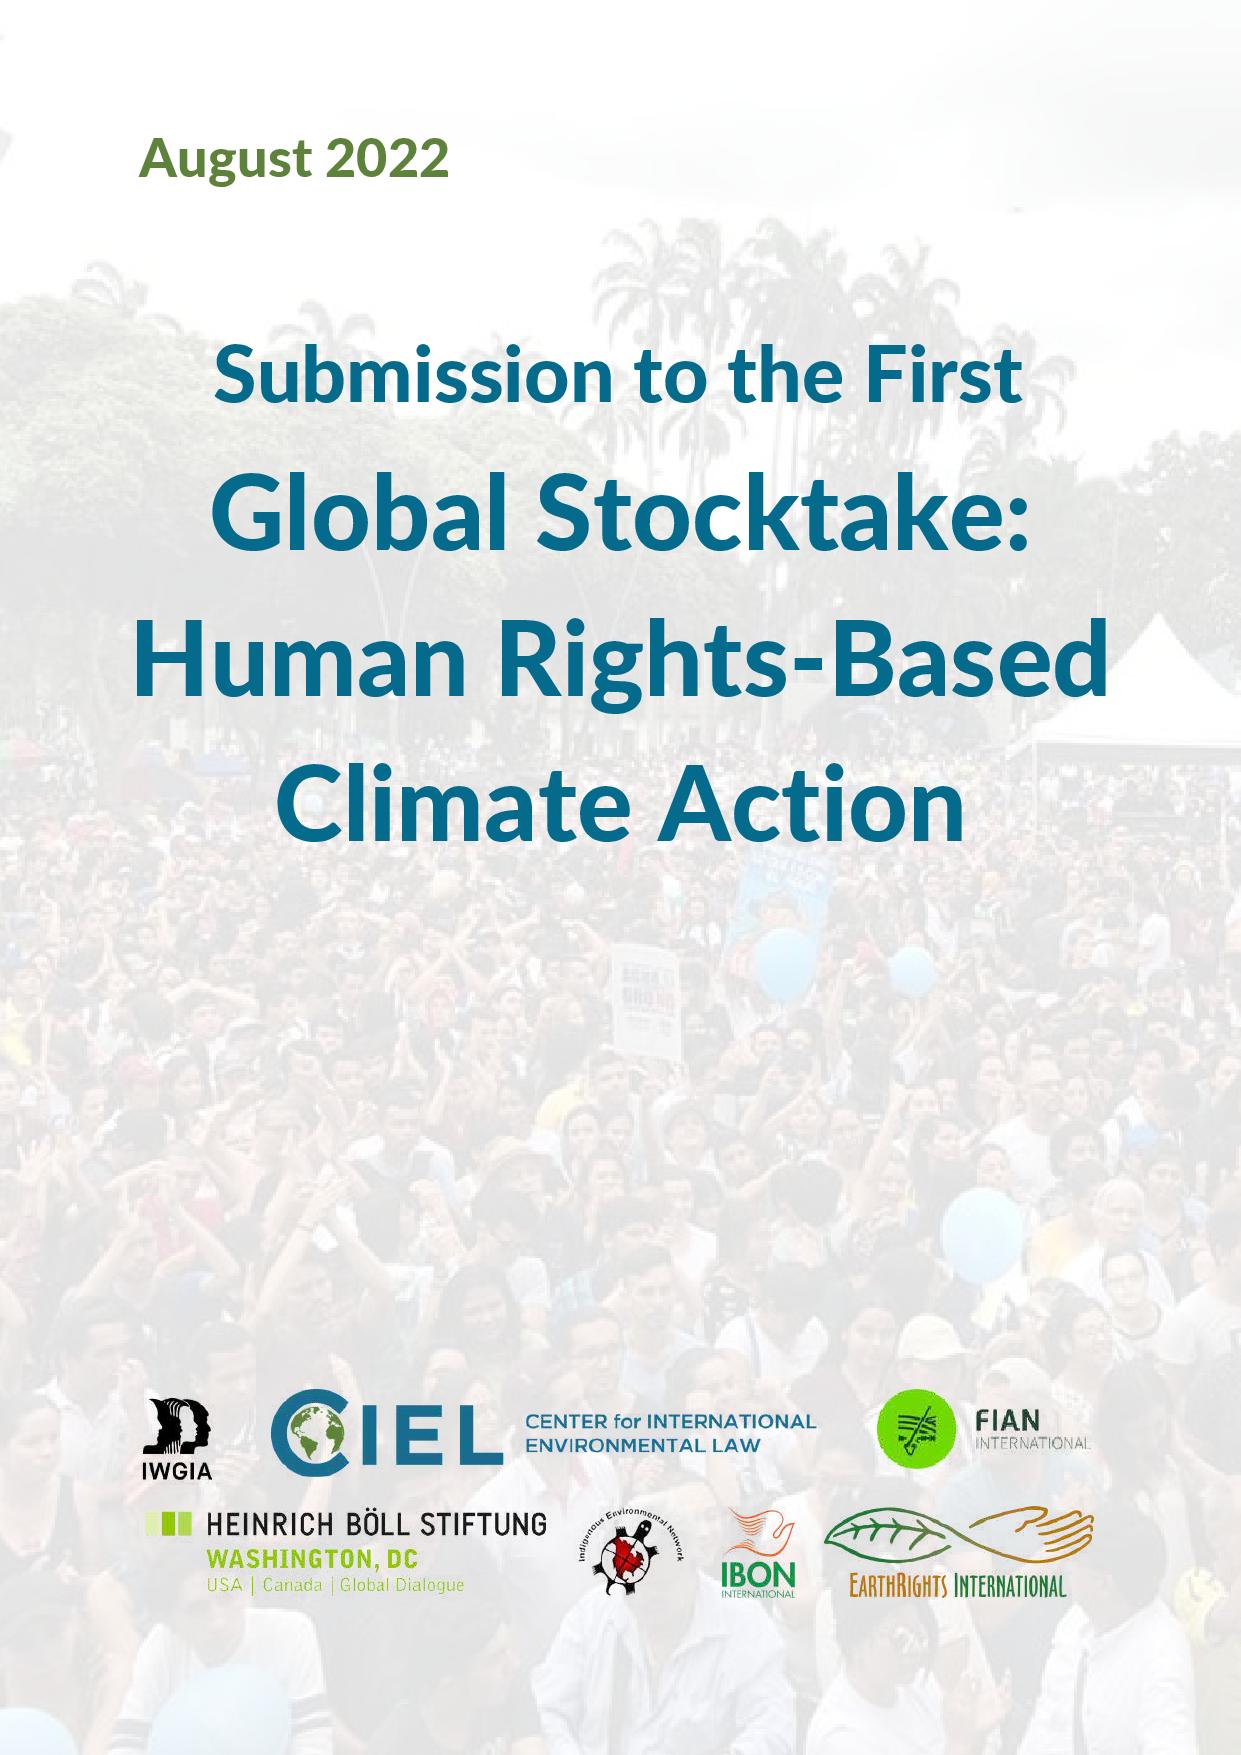 Joint CSO Submission to the First Global Stocktake: Human Rights-Based Climate Action